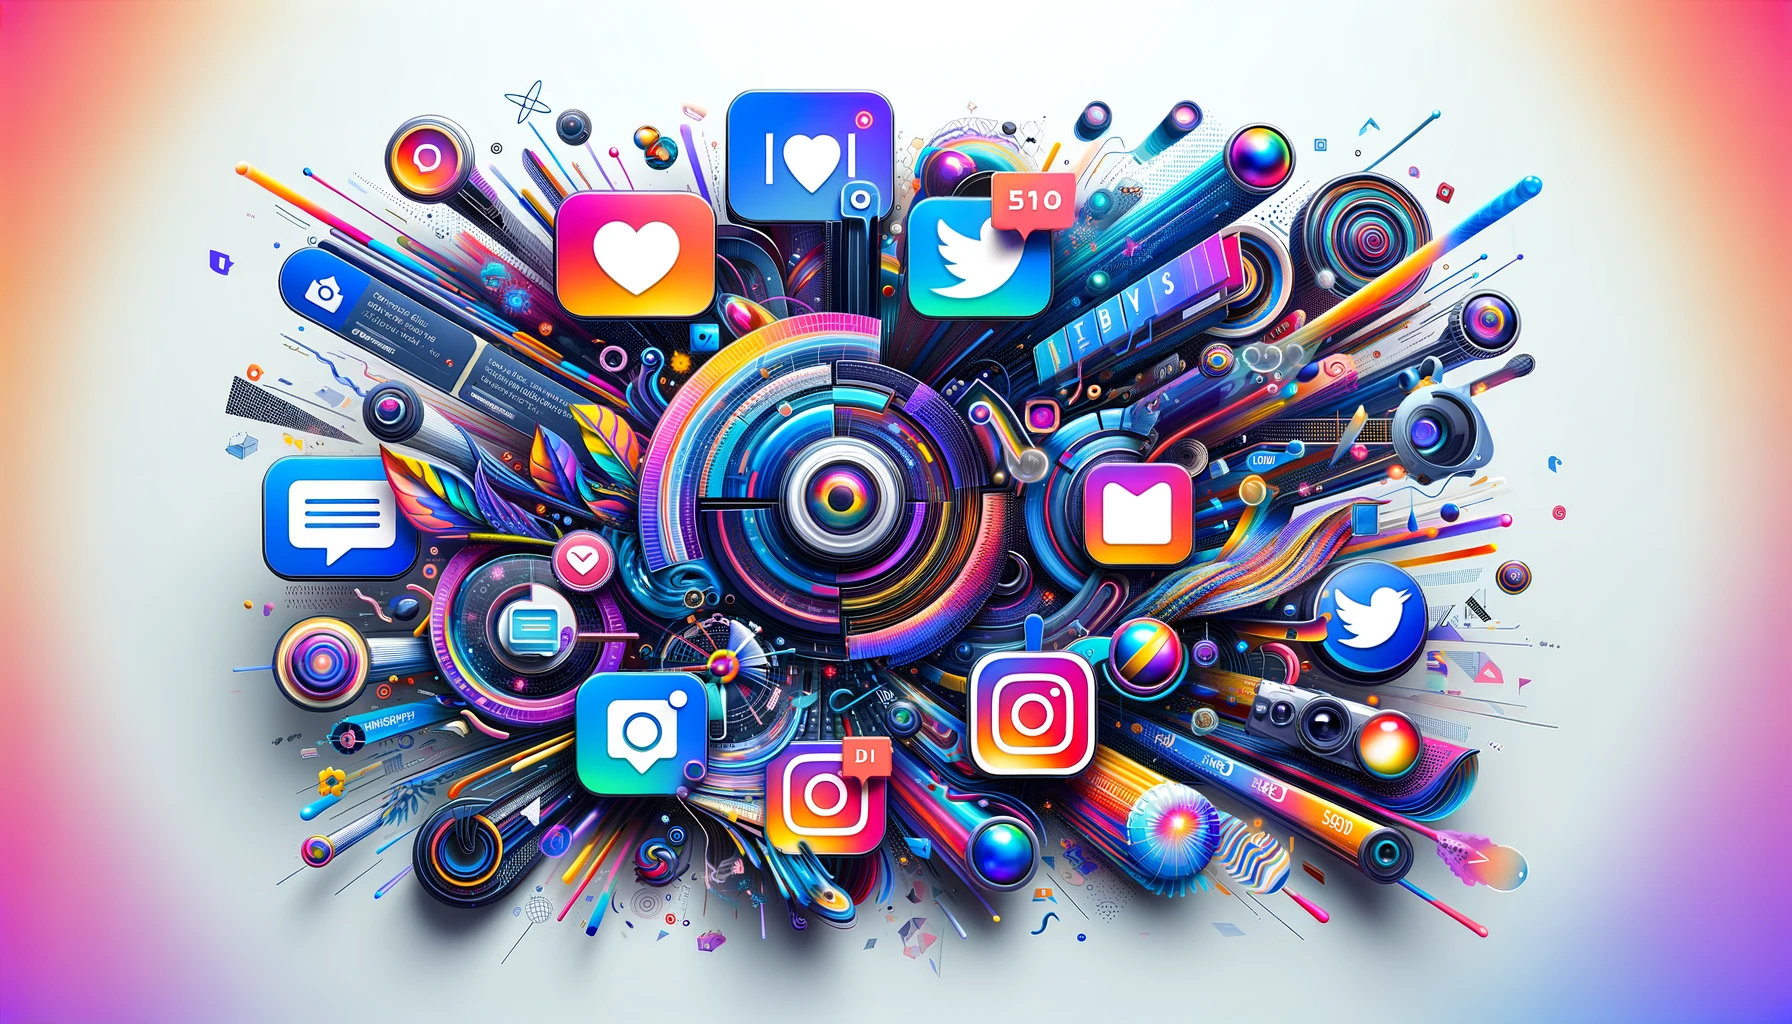 Abstract representation of various Instagram Ad Formats including photo ads, video ads, carousel ads, stories ads, and explore ads, symbolizing the engagement potential on Instagram.